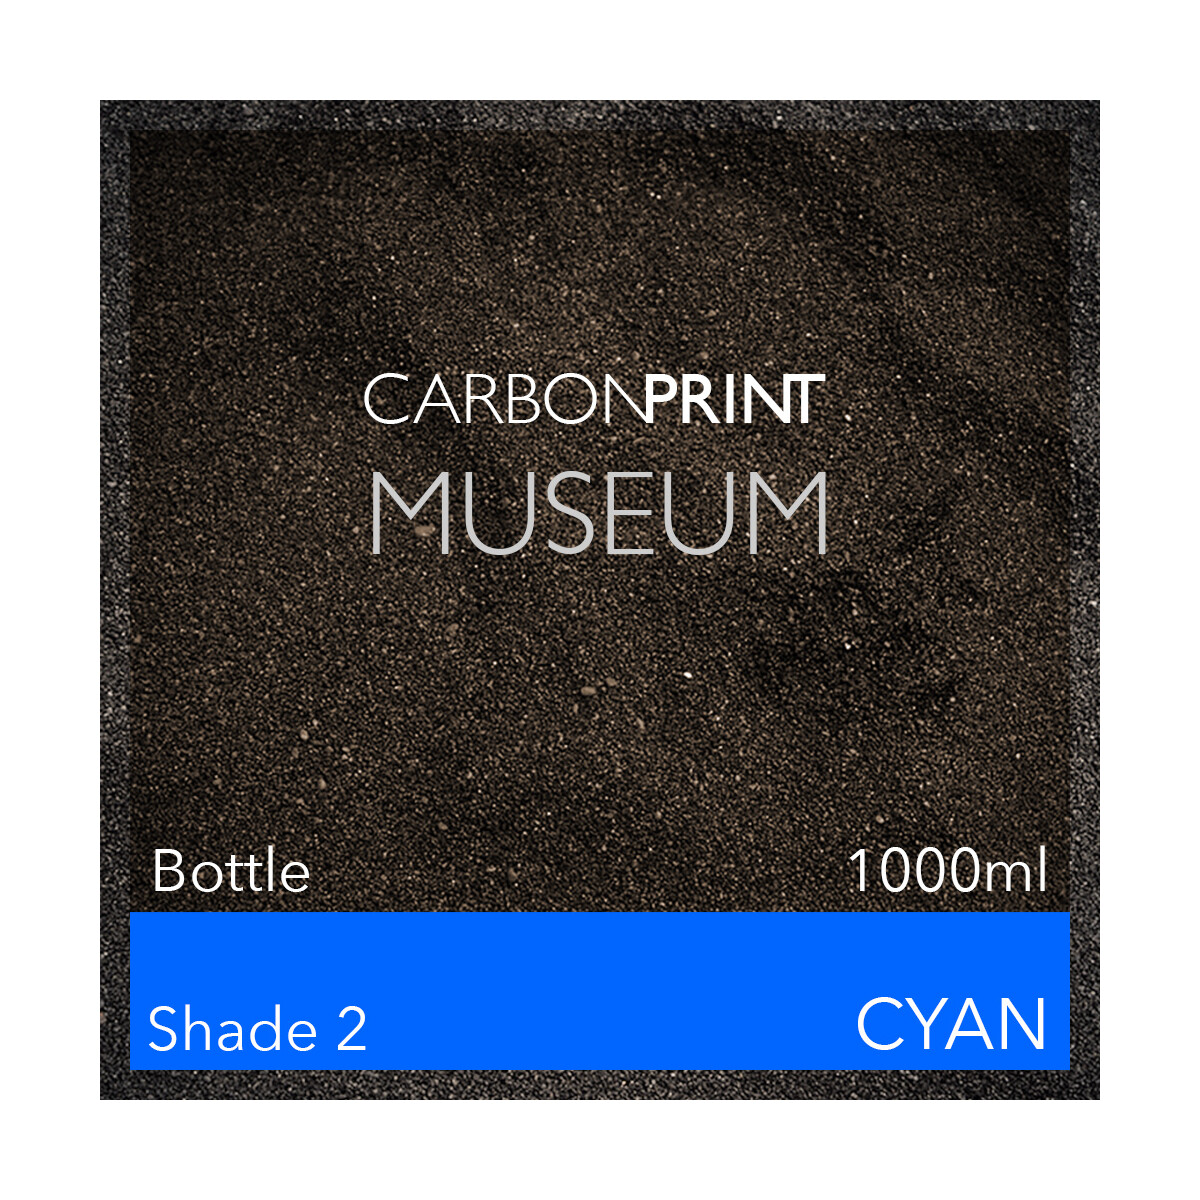 Carbonprint Museum Shade2 Channel C 1000ml